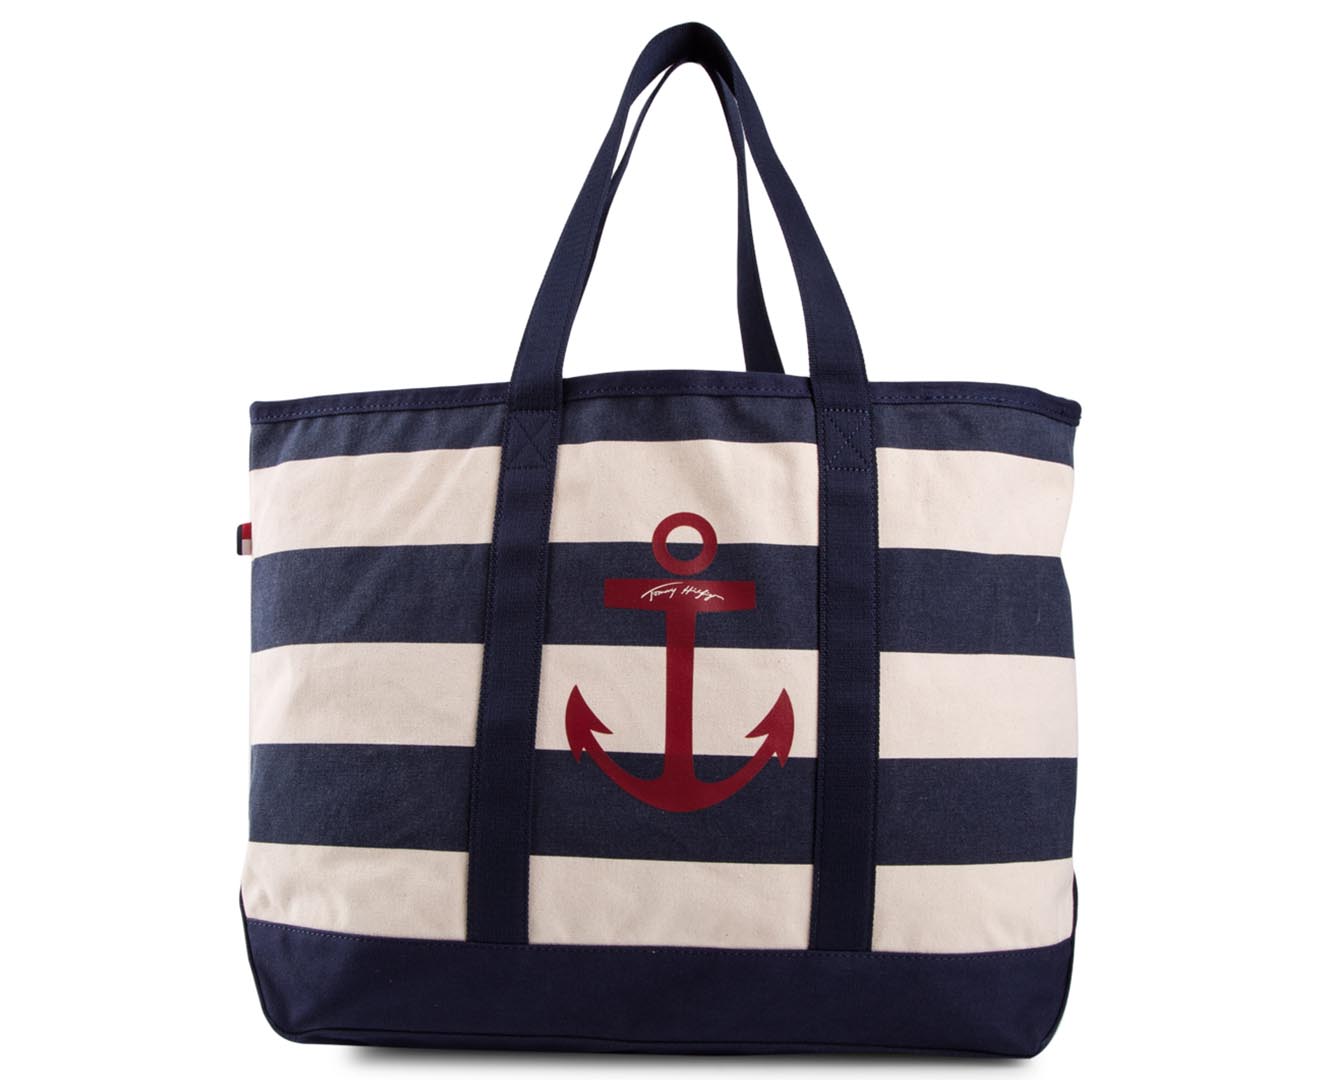 Tommy Hilfiger Anchor Signature Canvas Tote Bag - Navy/Neutral | Catch ...